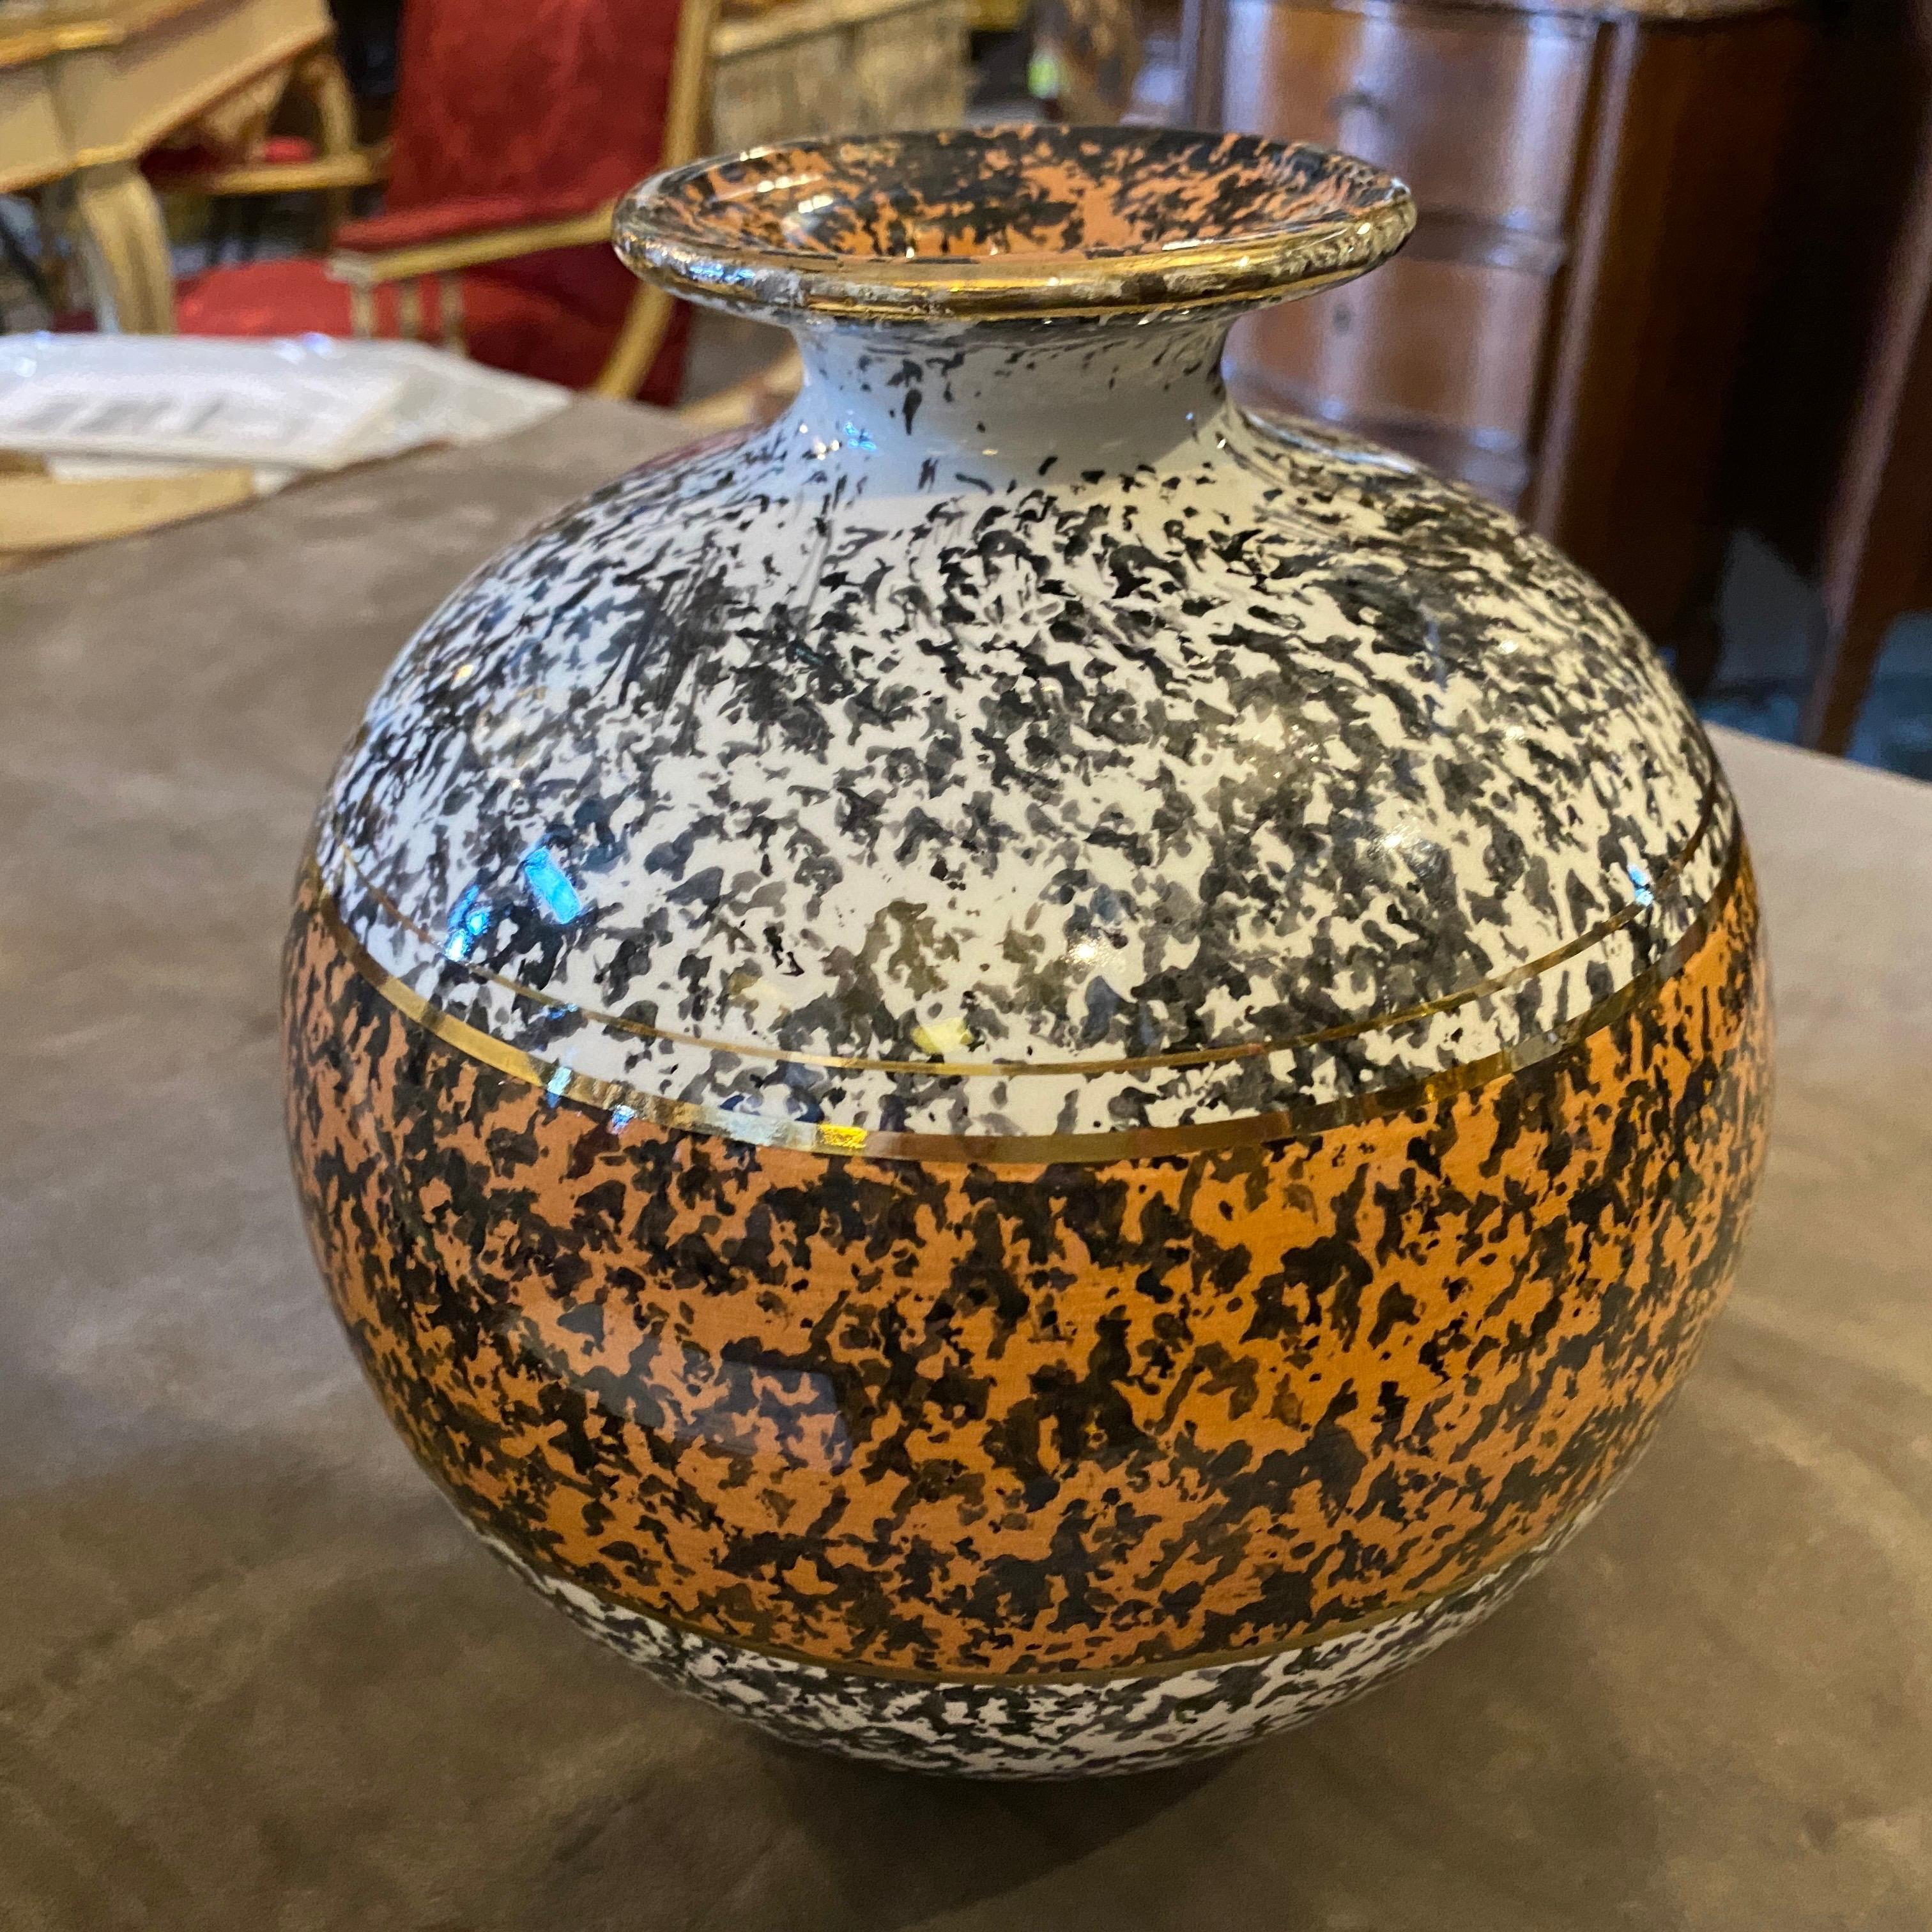 A ceramic vase designed and hand-crafted in italy in the Fifties, good conditions overall. This Italian vase exhibits the iconic design elements of that era. Mid-Century Modern design during the 1970s often featured a combination of organic shapes,